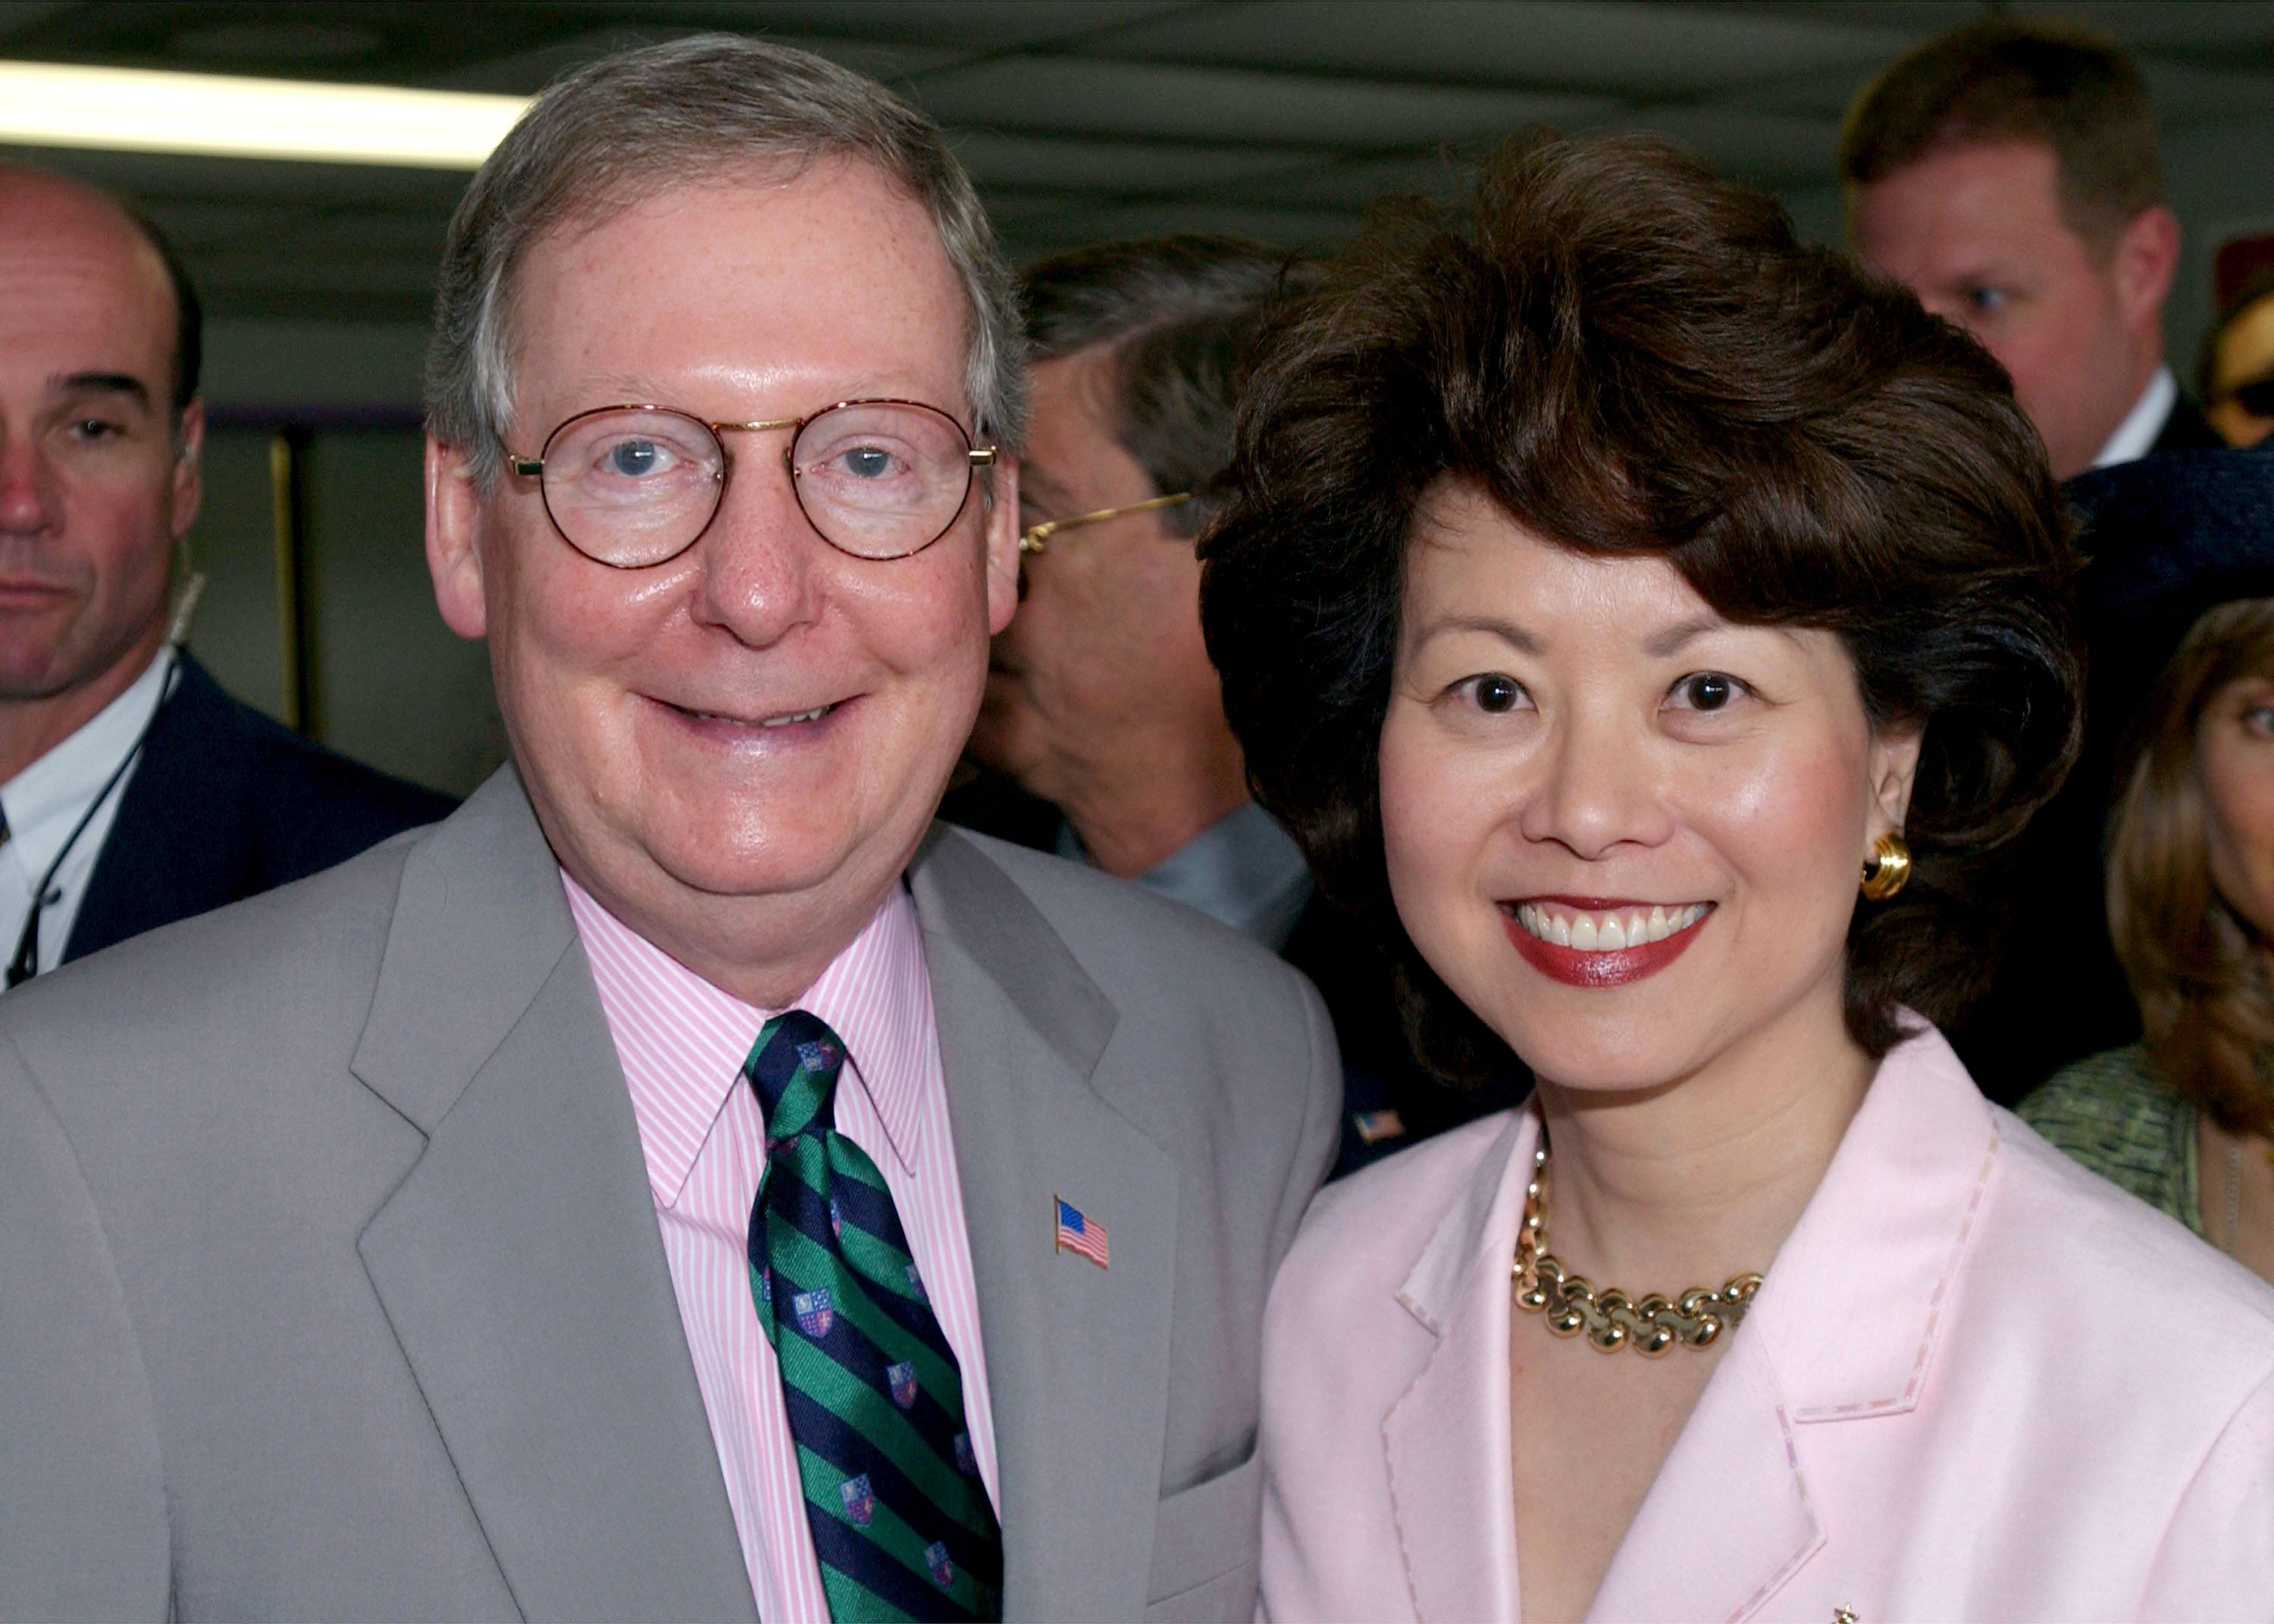 Mitch McConnell and Elaine Chao.